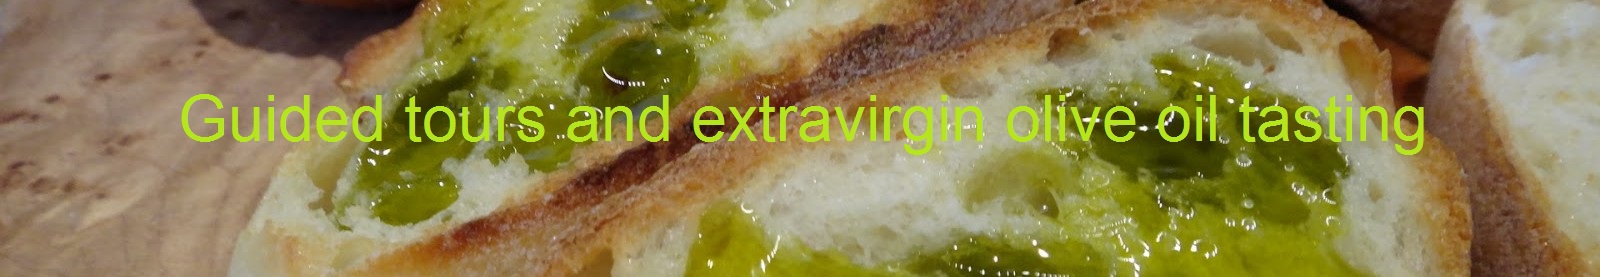 Guided tours and extravirgin olive oil tasting